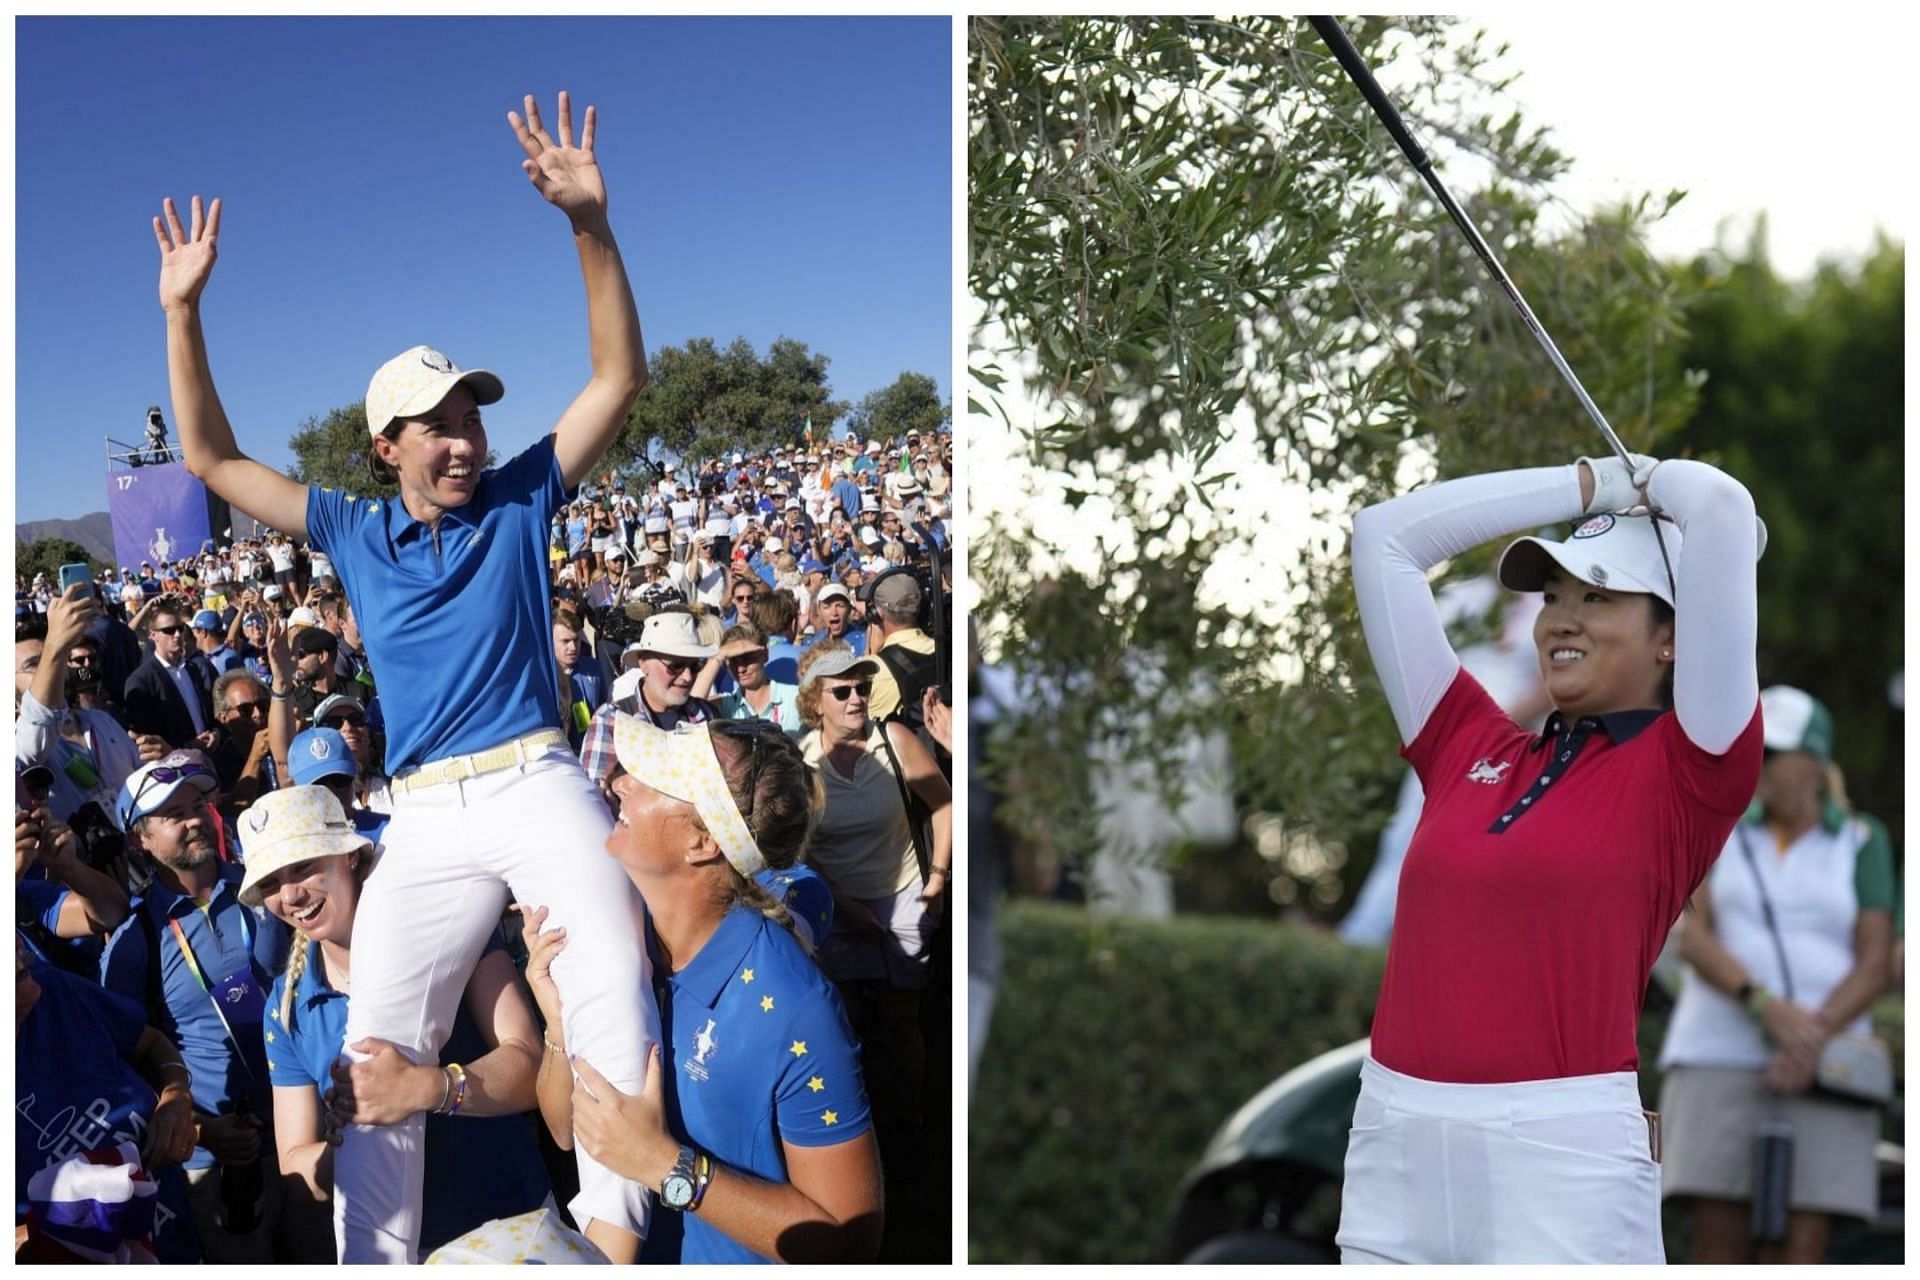 While Ciganda had a dream run at the 2023 Solheim Cup, Rose Zhang struggled throughout the week(Images via Getty)